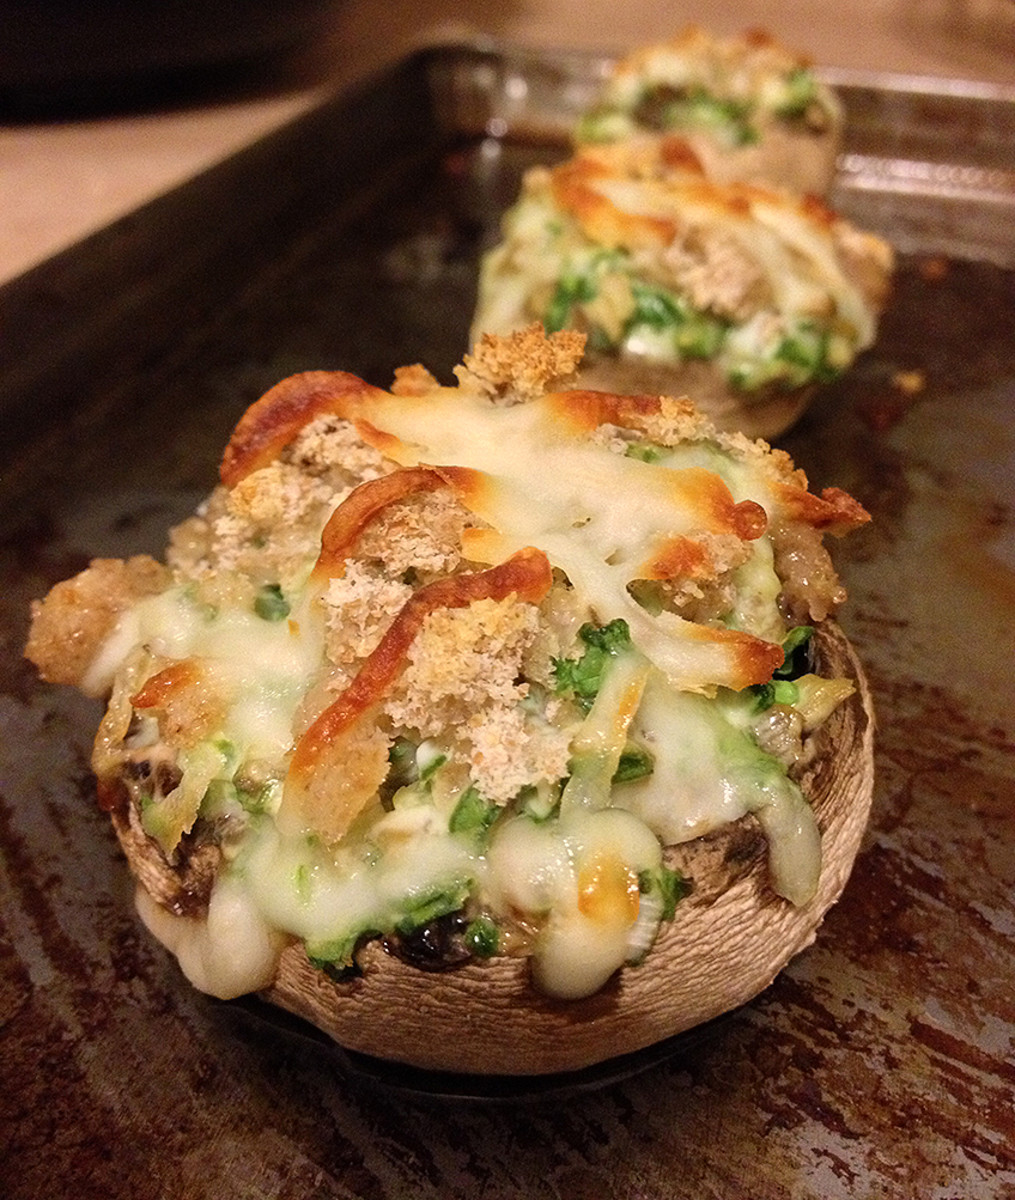 -- All Rights Reserved -- Do Not Distribute -- Spinach and Cheese Stuffed Mushroom Caps with Parmesan Crumbs